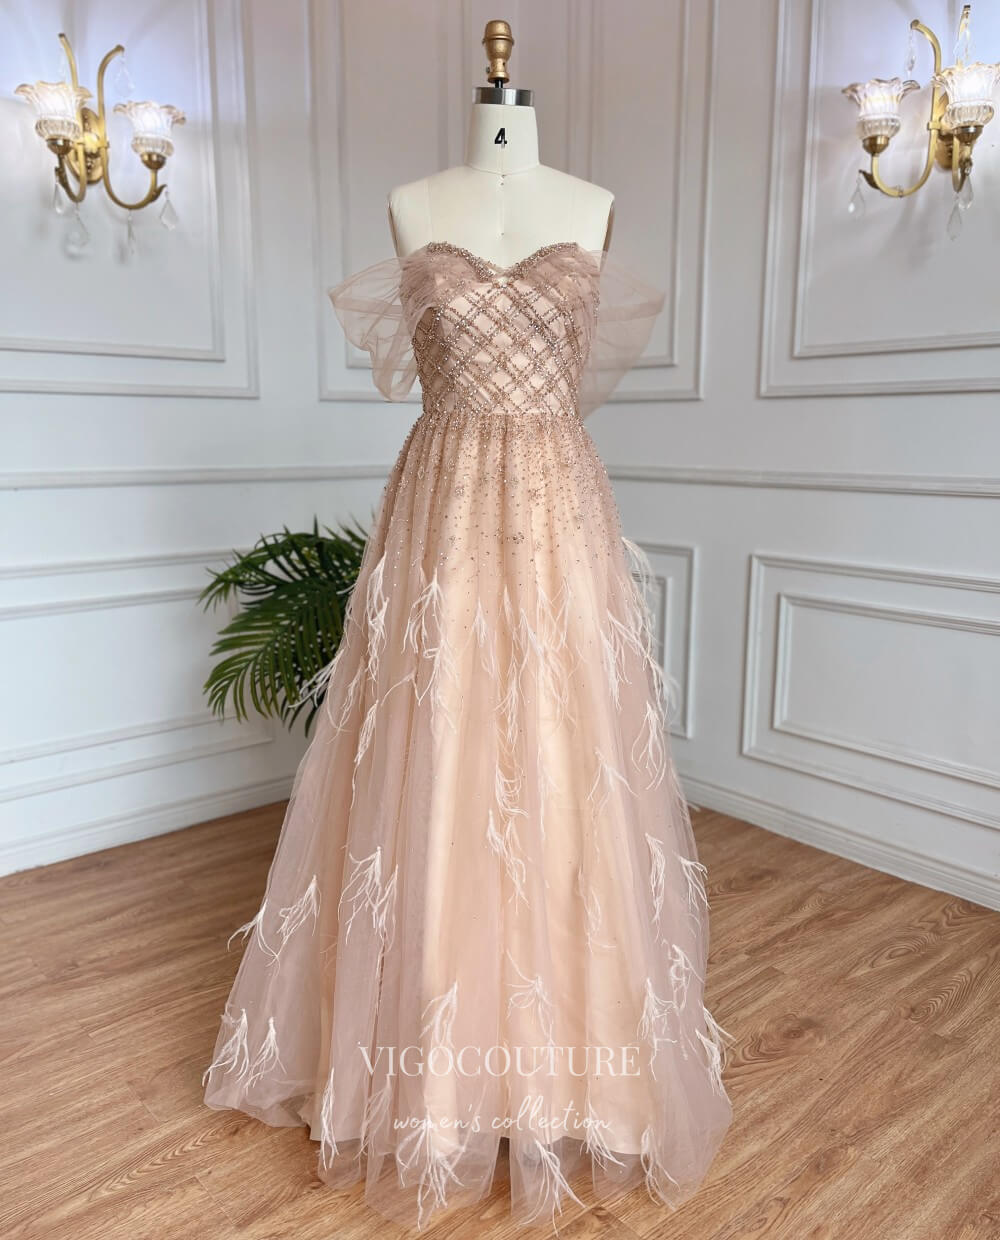 vigocouture Vintage Beaded Feather Prom Dresses